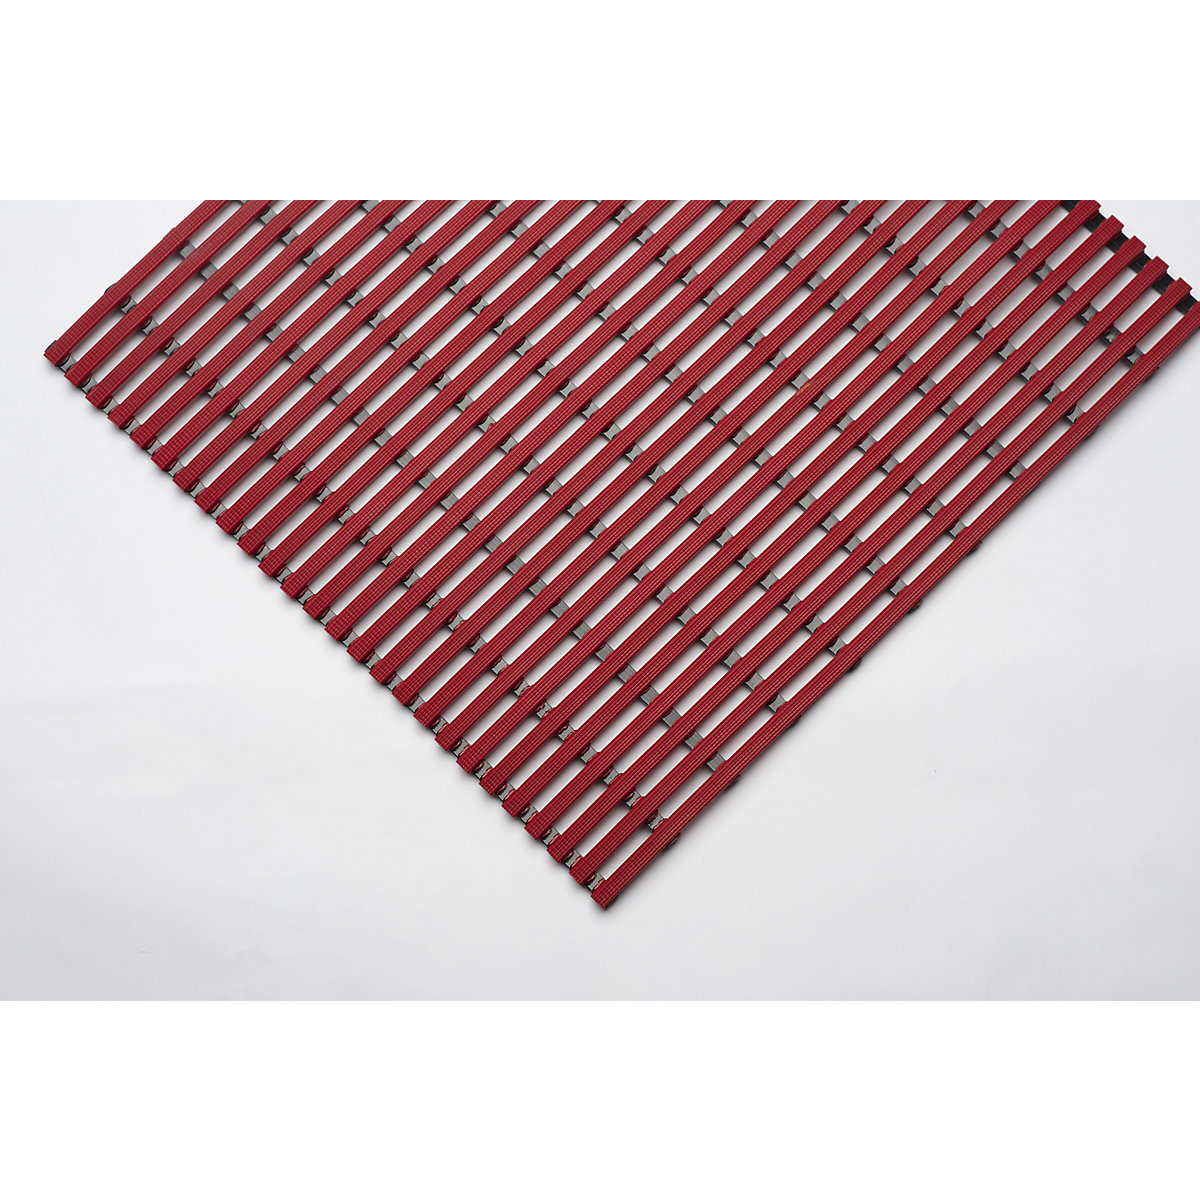 Floor mat for showers and changing rooms (Product illustration 3)-2